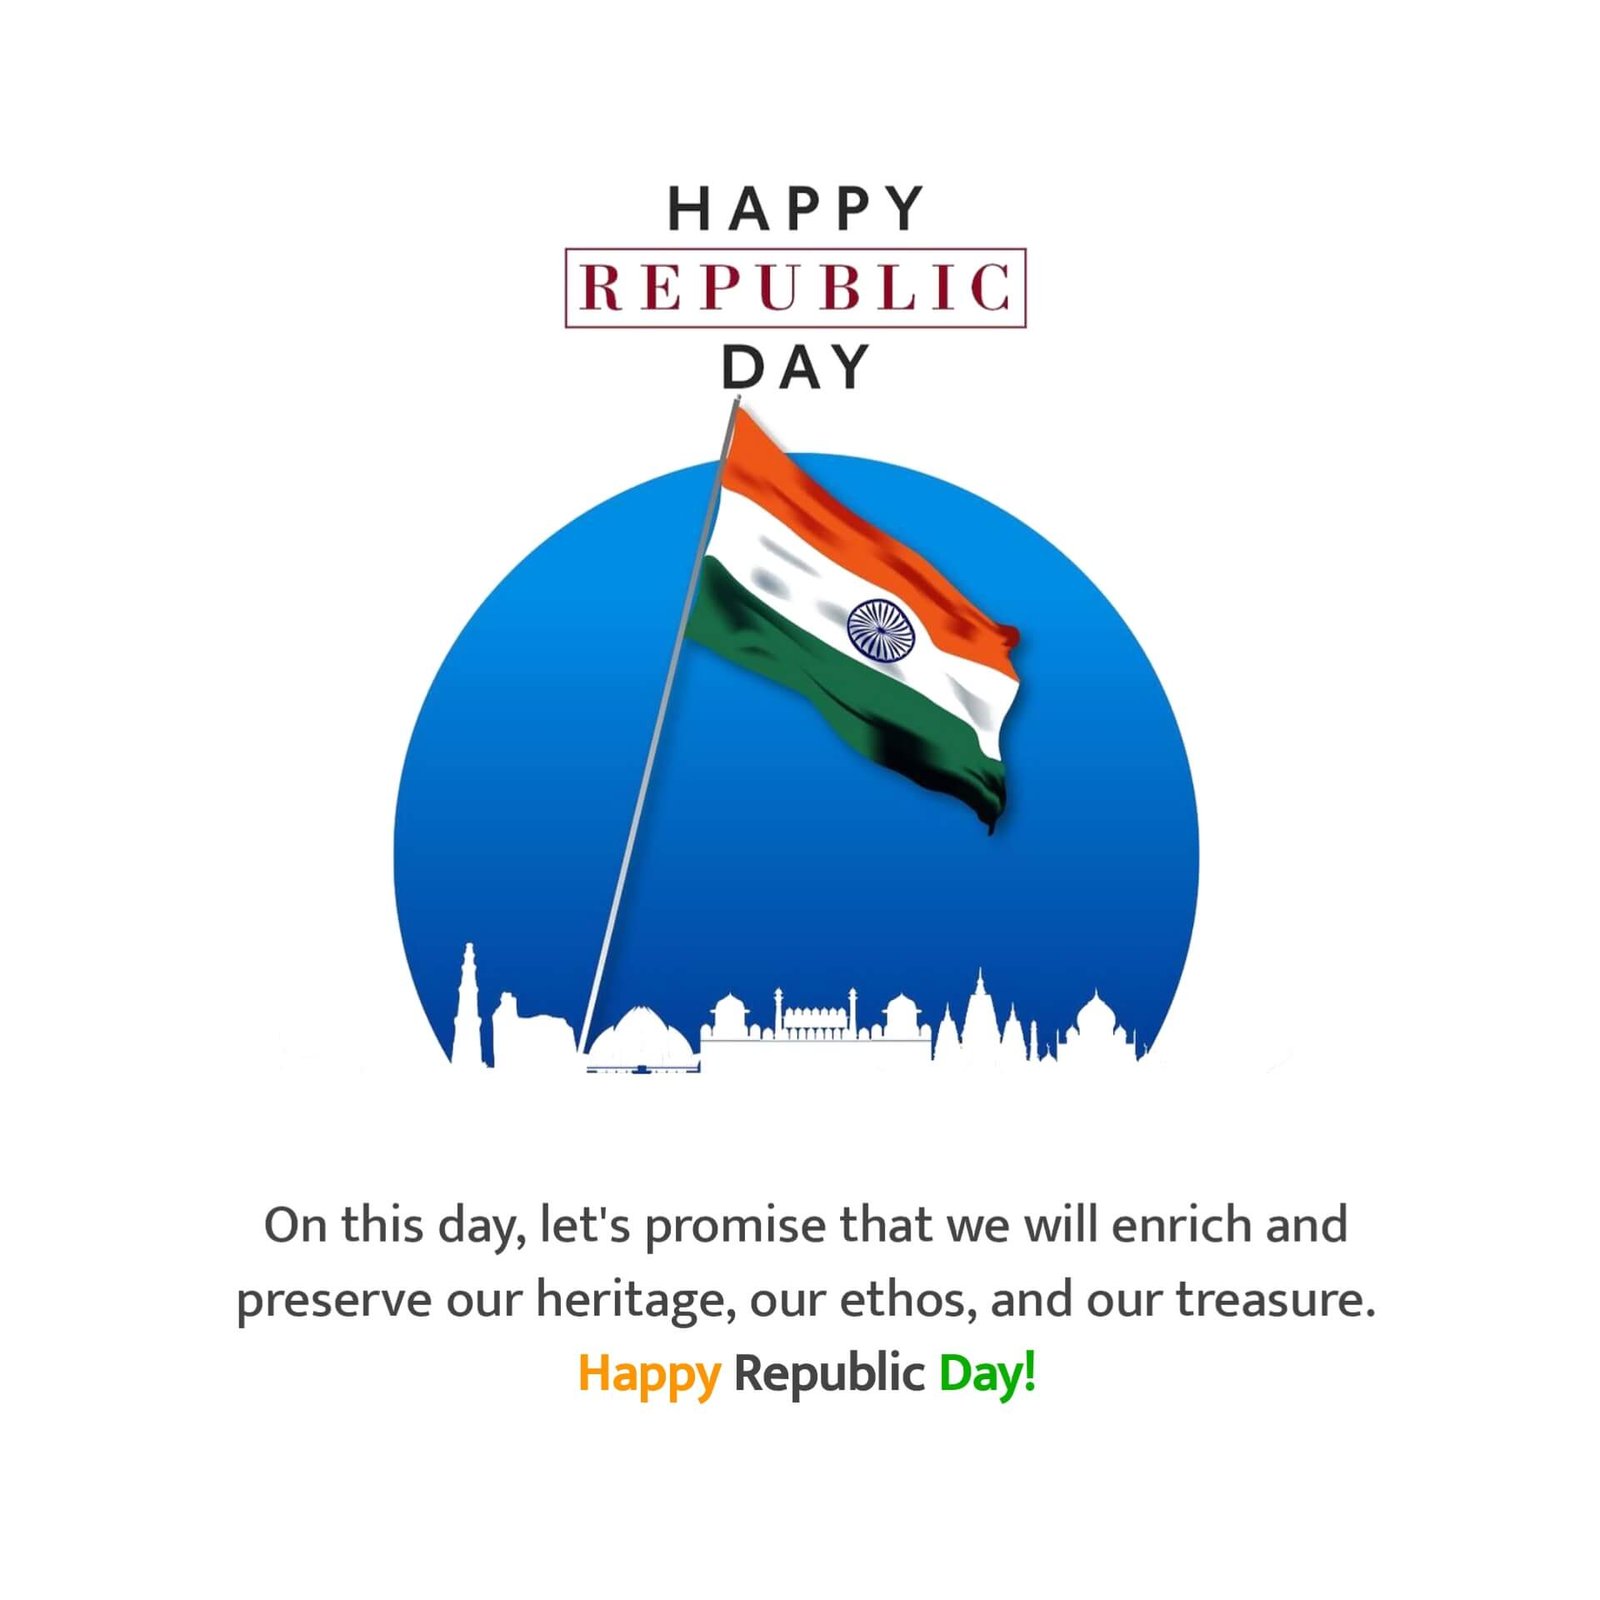 republic day images, republic day quotes, republic day wishes